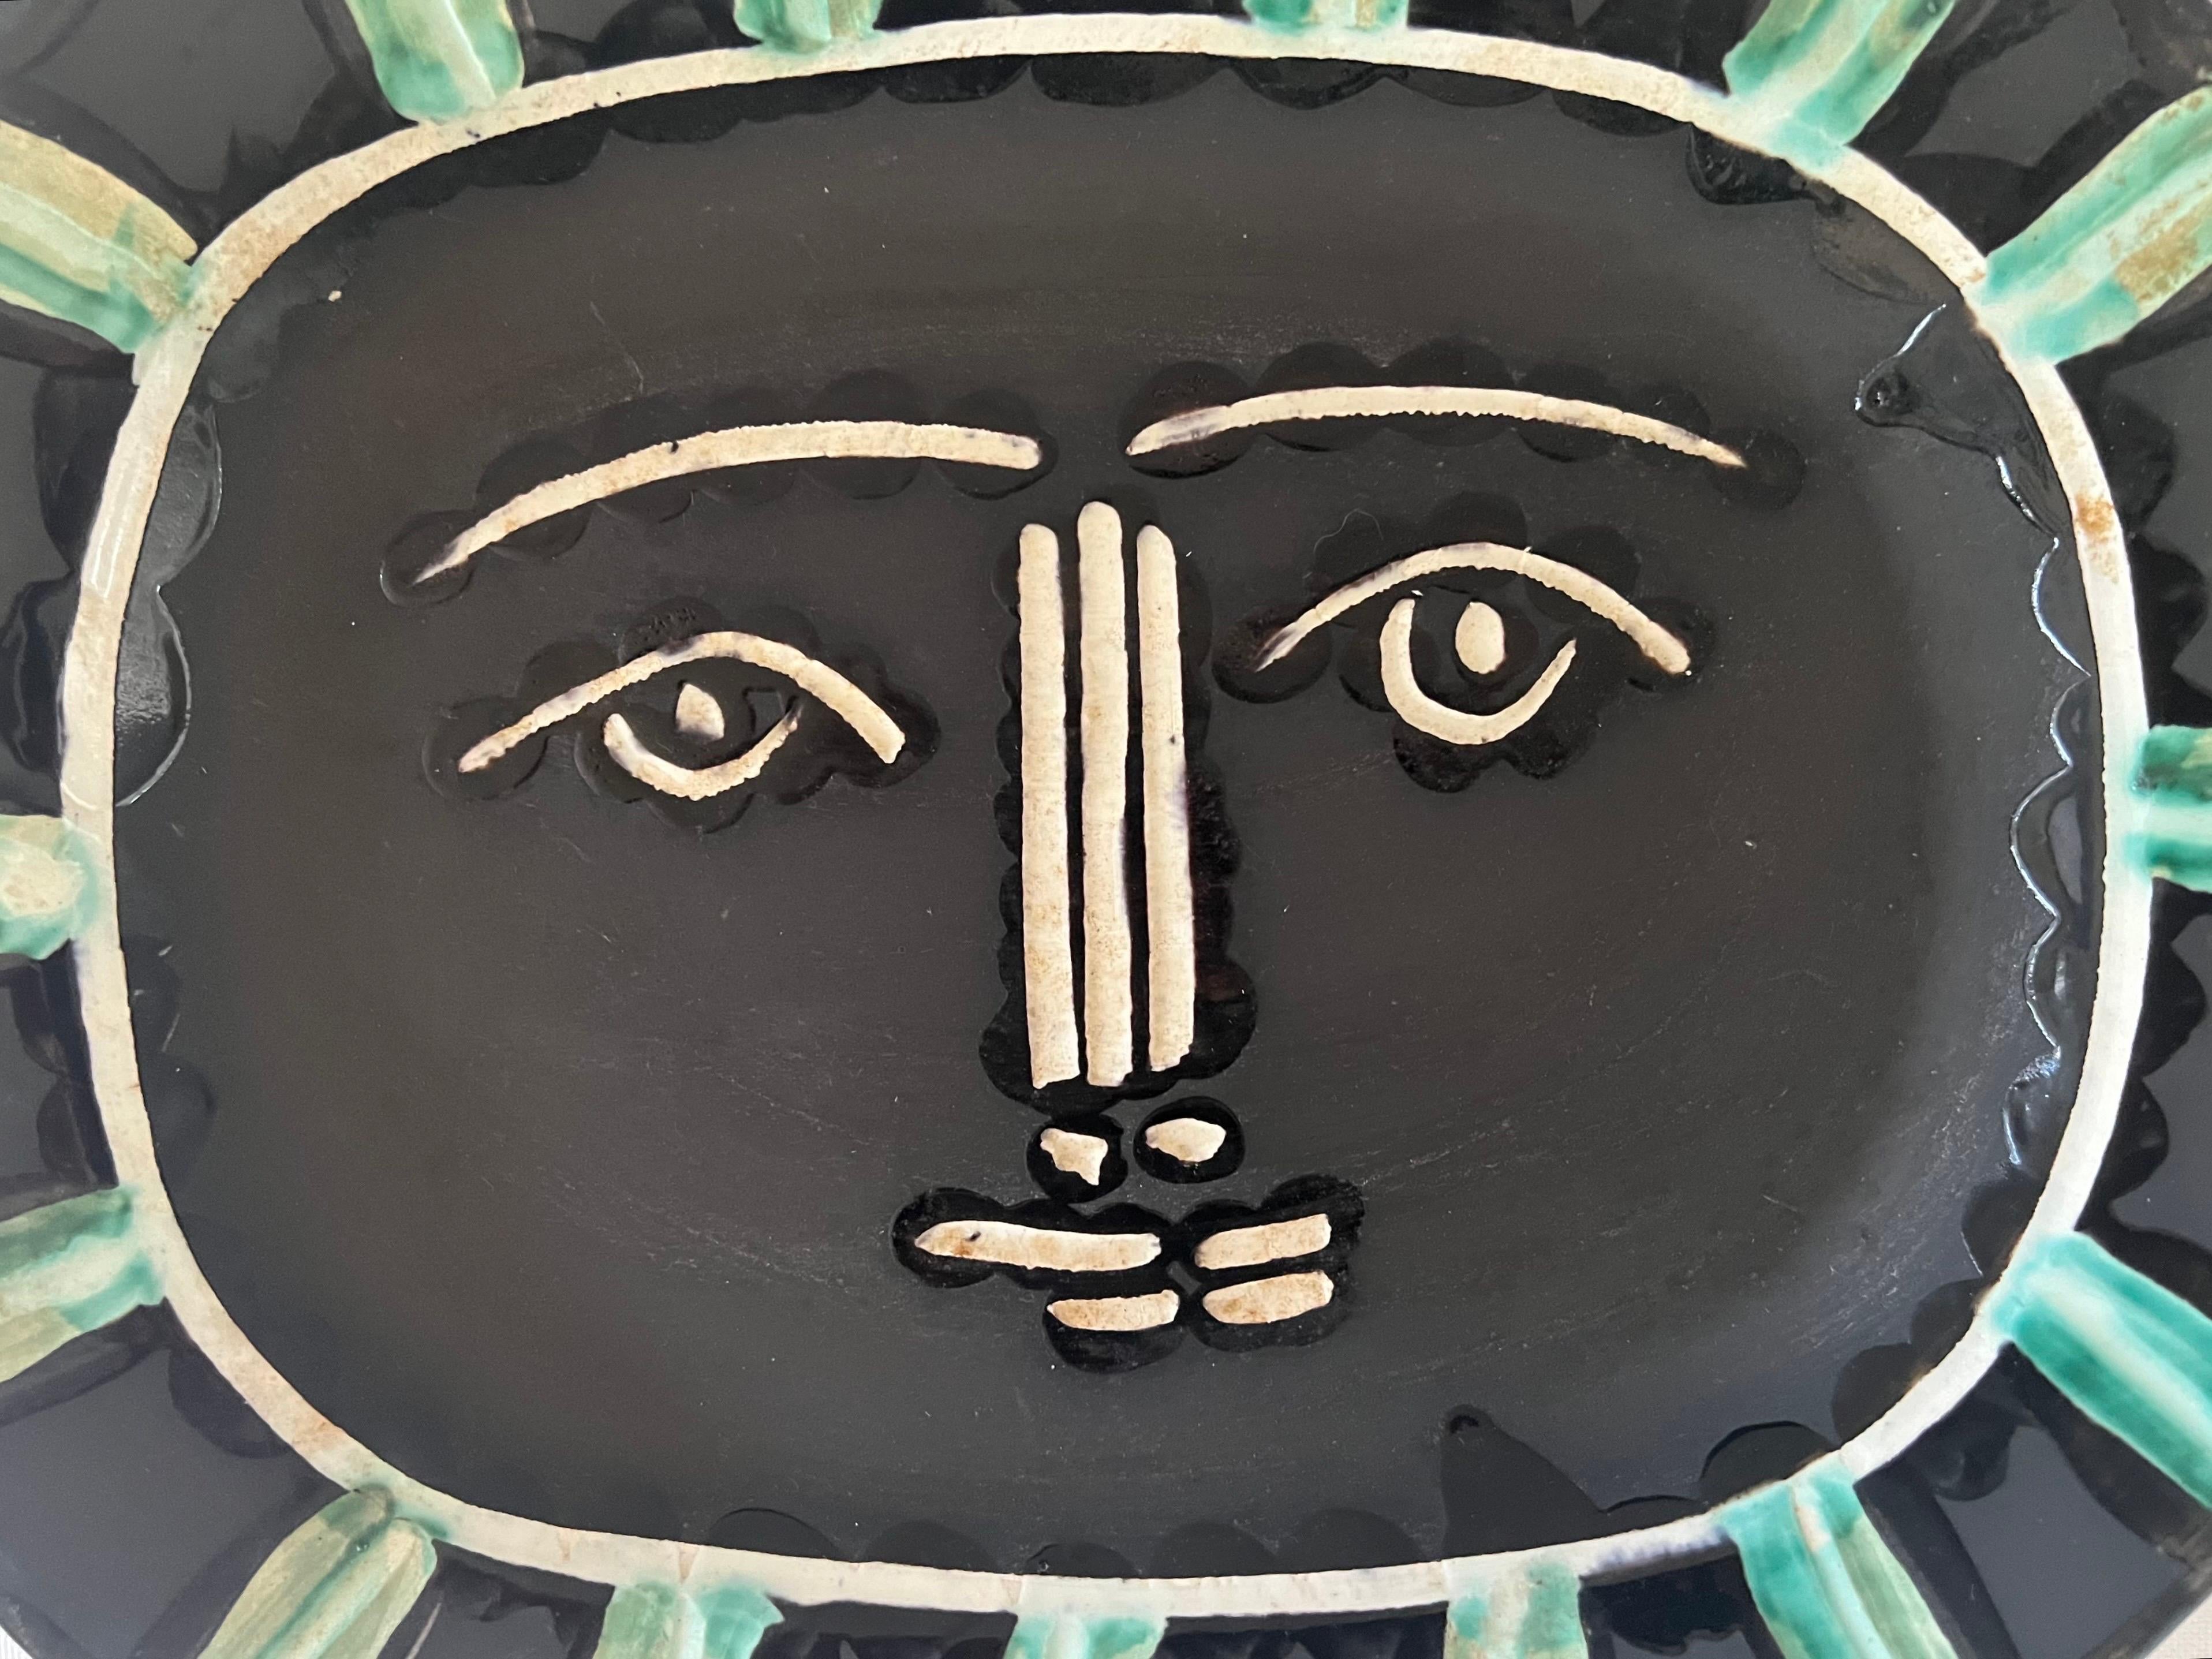 Mid-Century Modern Ceramic Plate Visage Gris 'Grey Face' A.R. 206 by Pablo Picasso & Madoura, 1953 For Sale